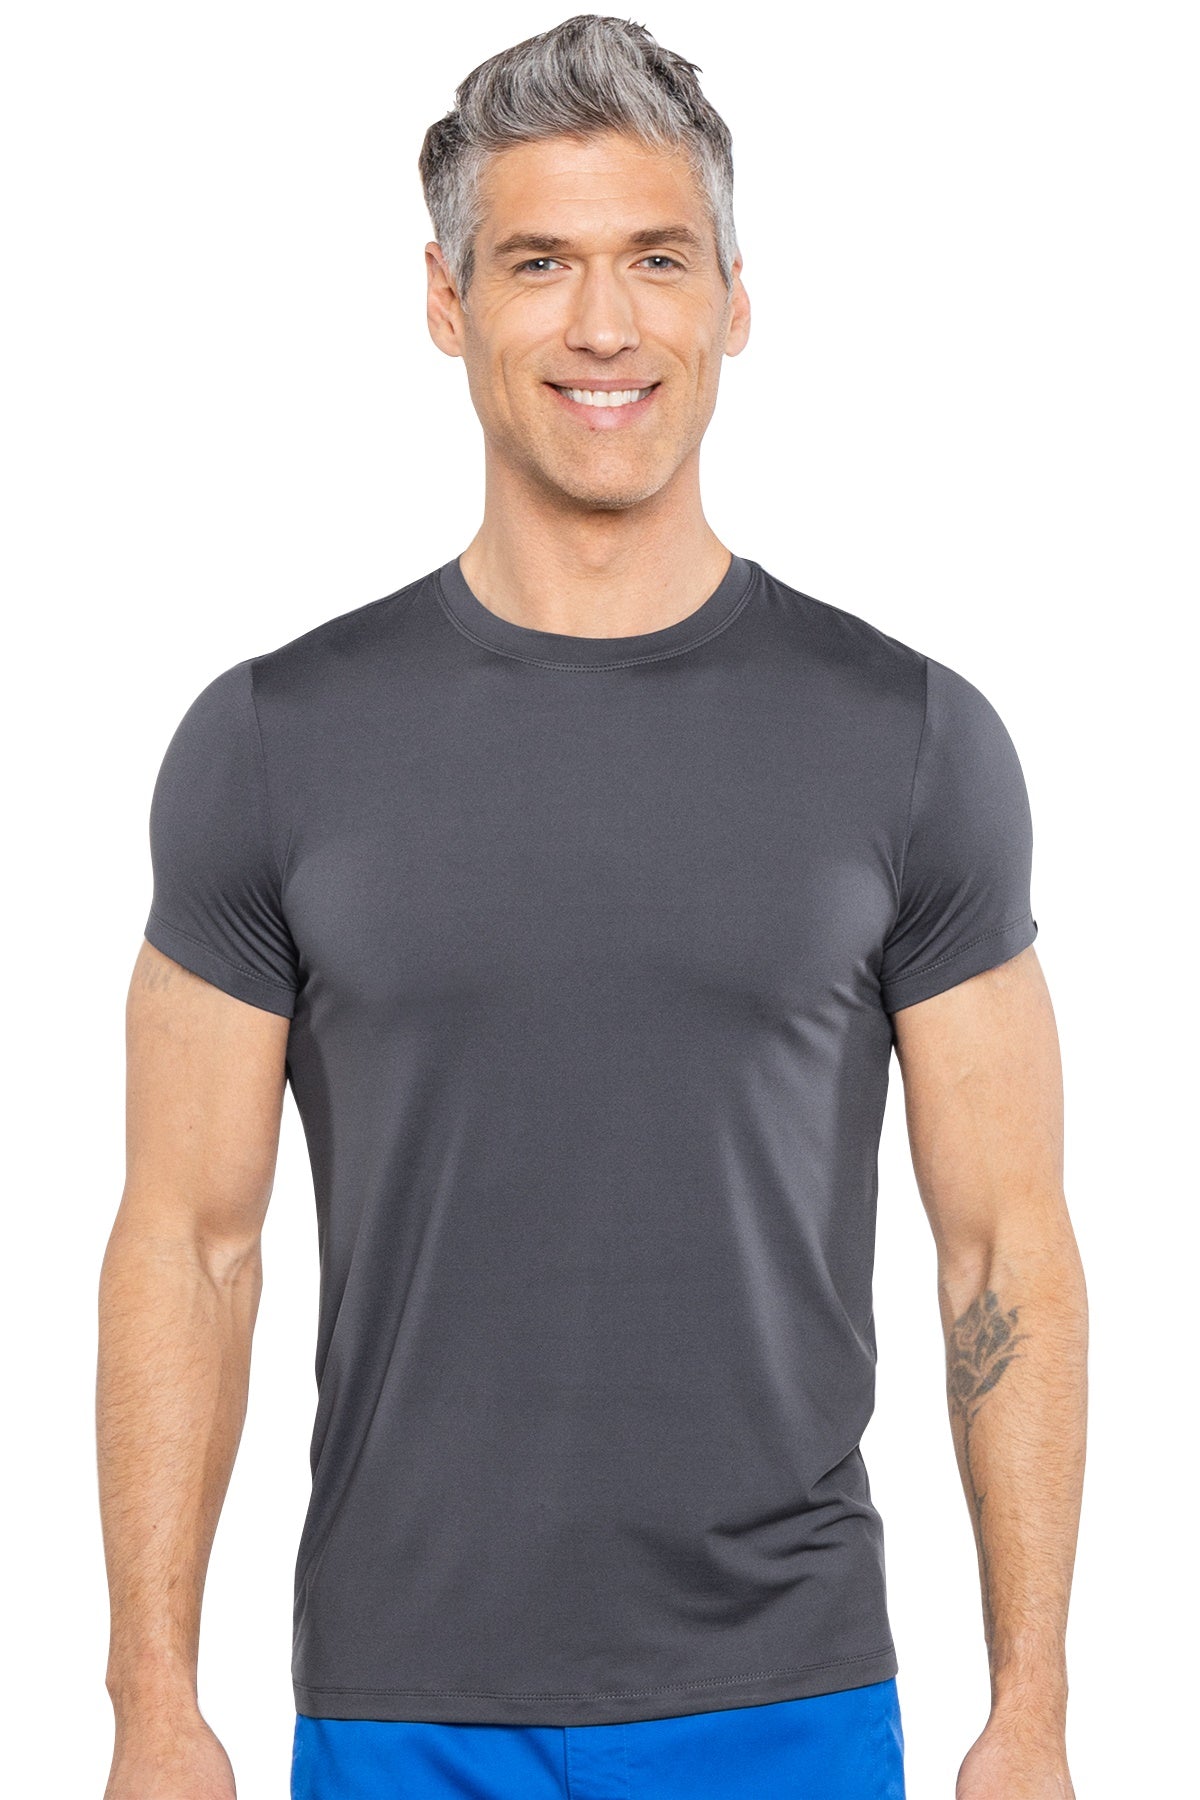 Med Couture Mens Scrub Top RothWear Mason Tee in Pewter at Parker's Clothing and Shoes.